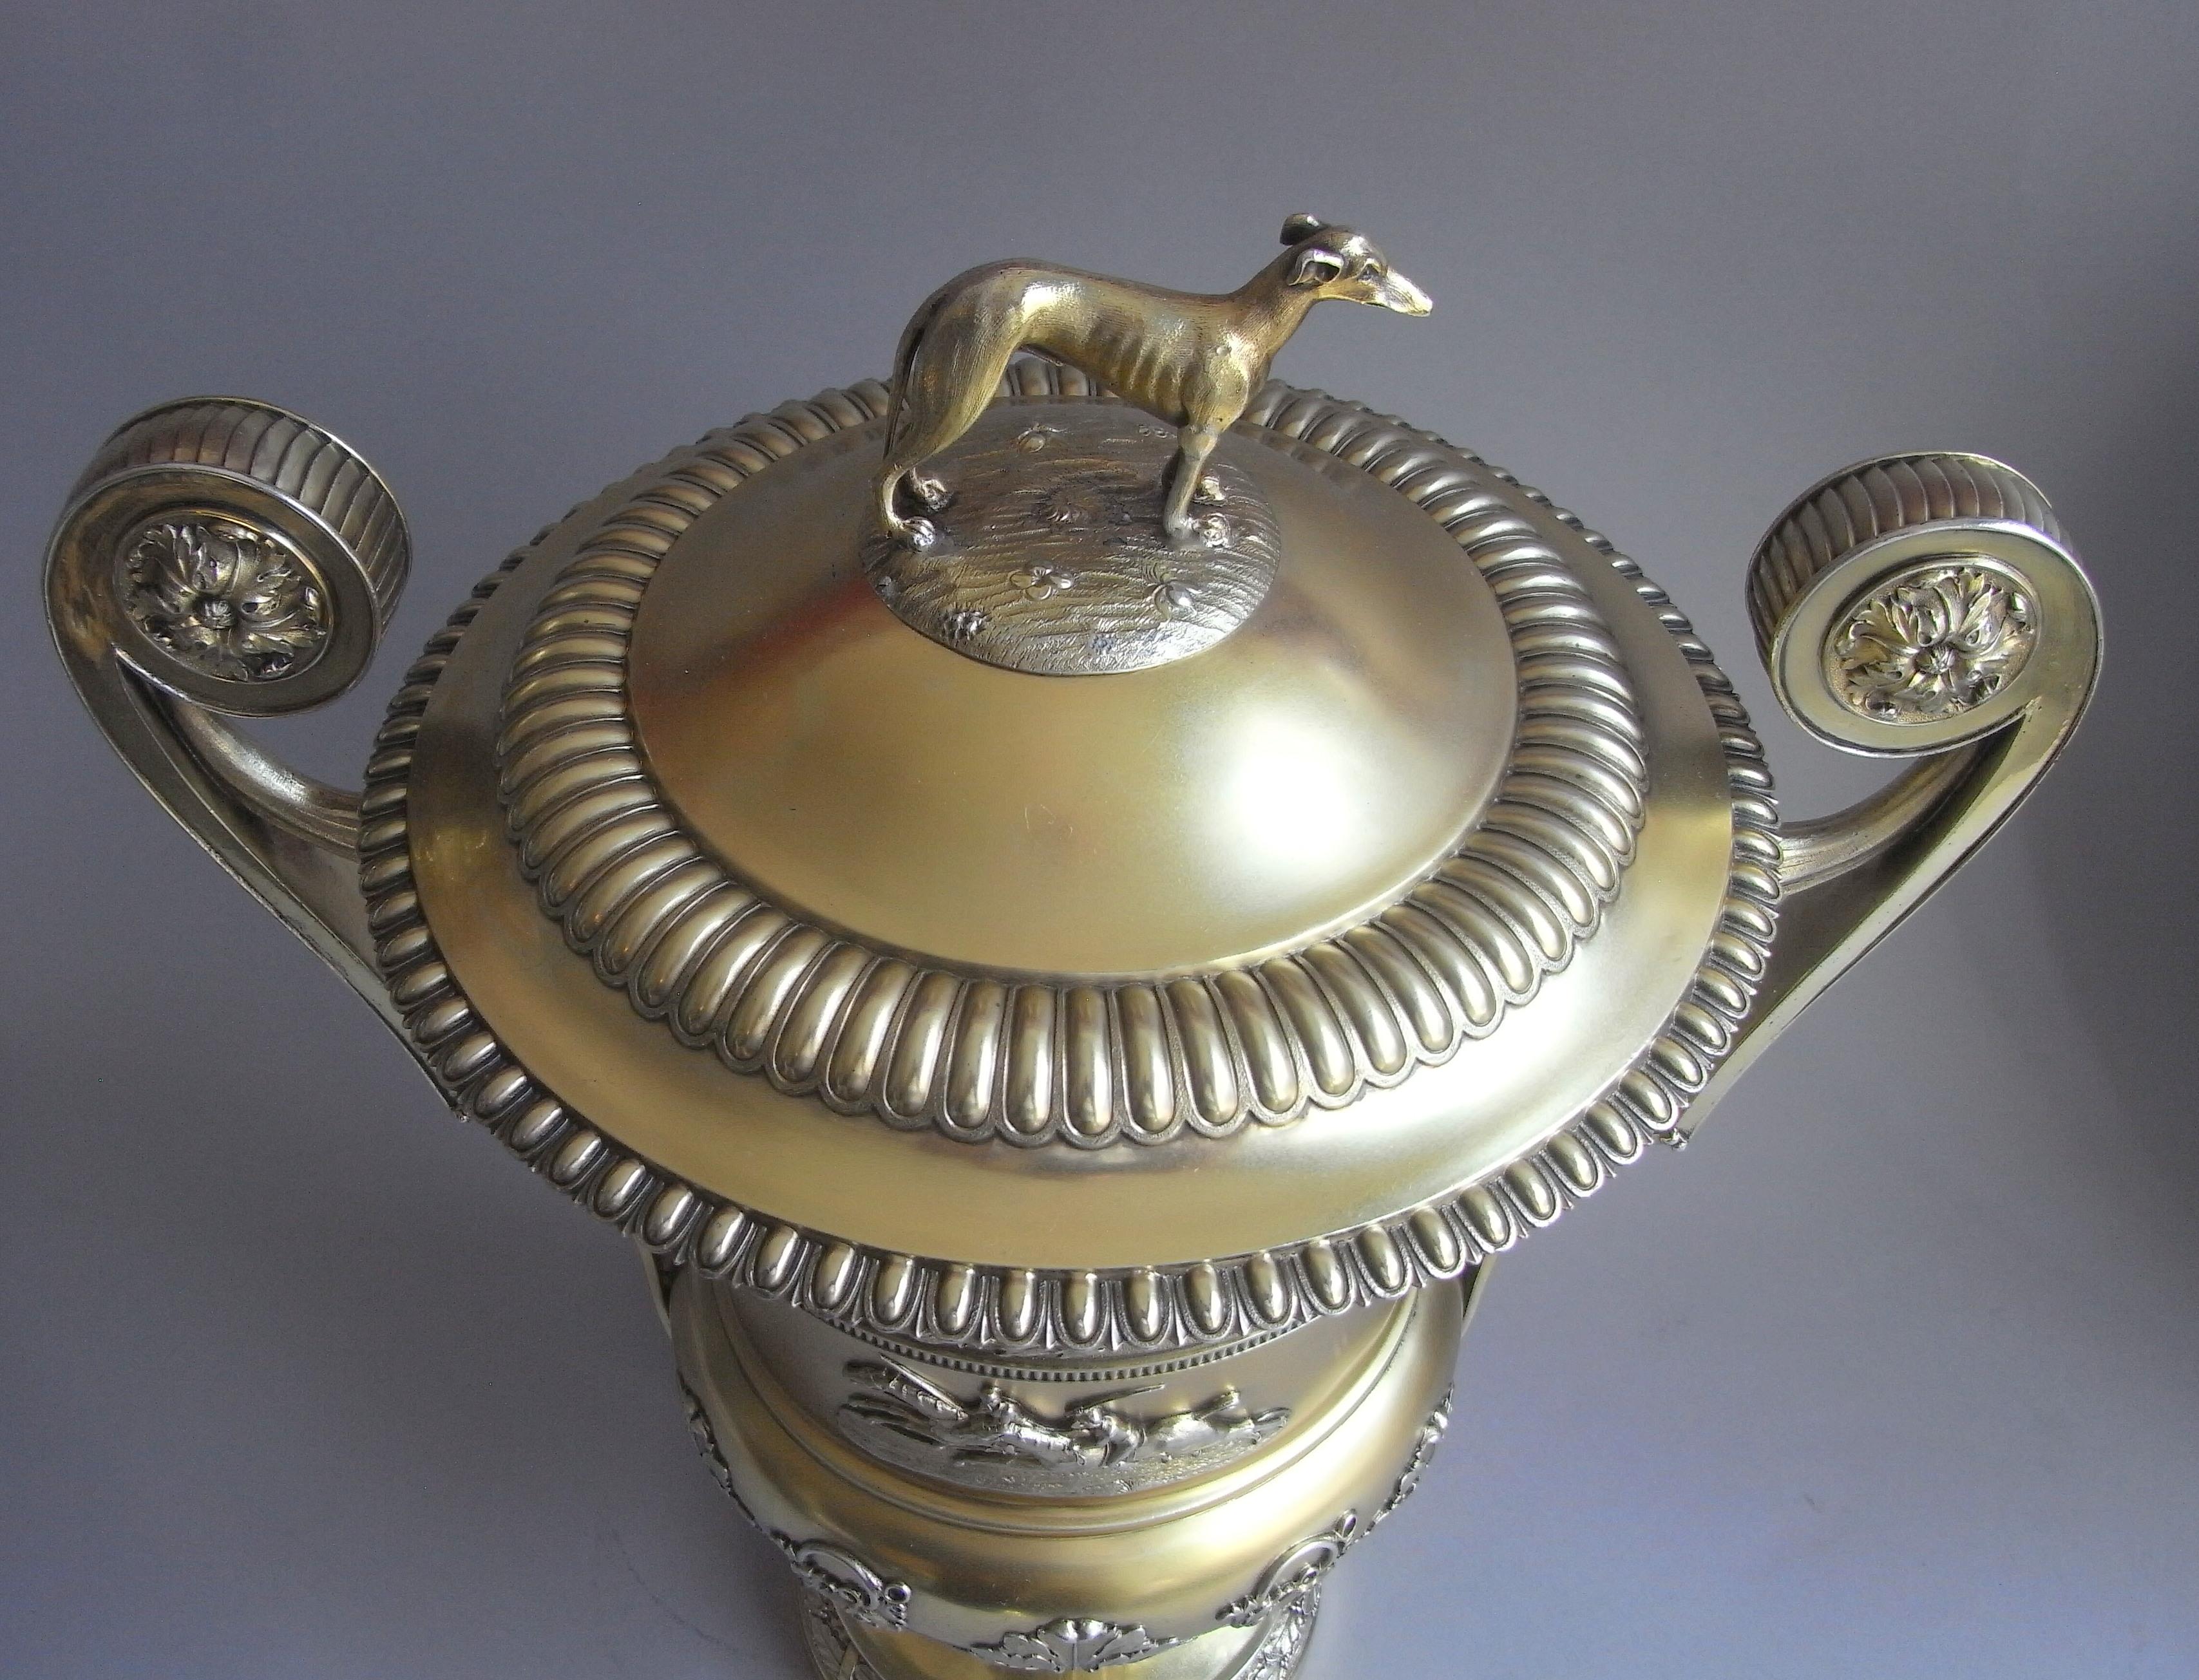 European George III Silver Gilt Cup & Cover Made in London in 1815 by William Elliot